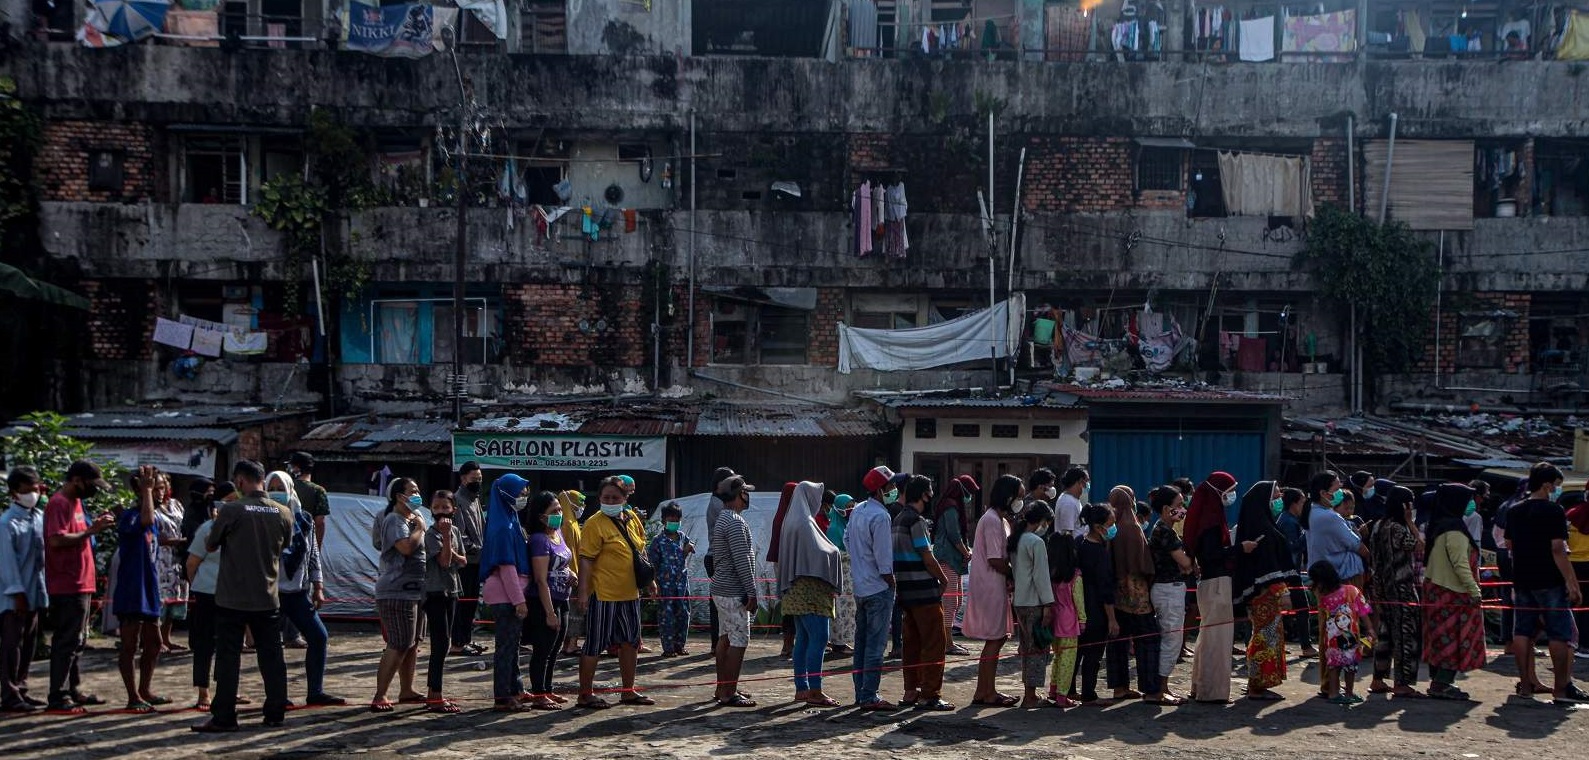 Hundreds of people line up for foodstuffs at a slum area in Palembang, Indonesia on 24 February 2022 (Muhammad A.F/Anadolu Agency via Getty Images)